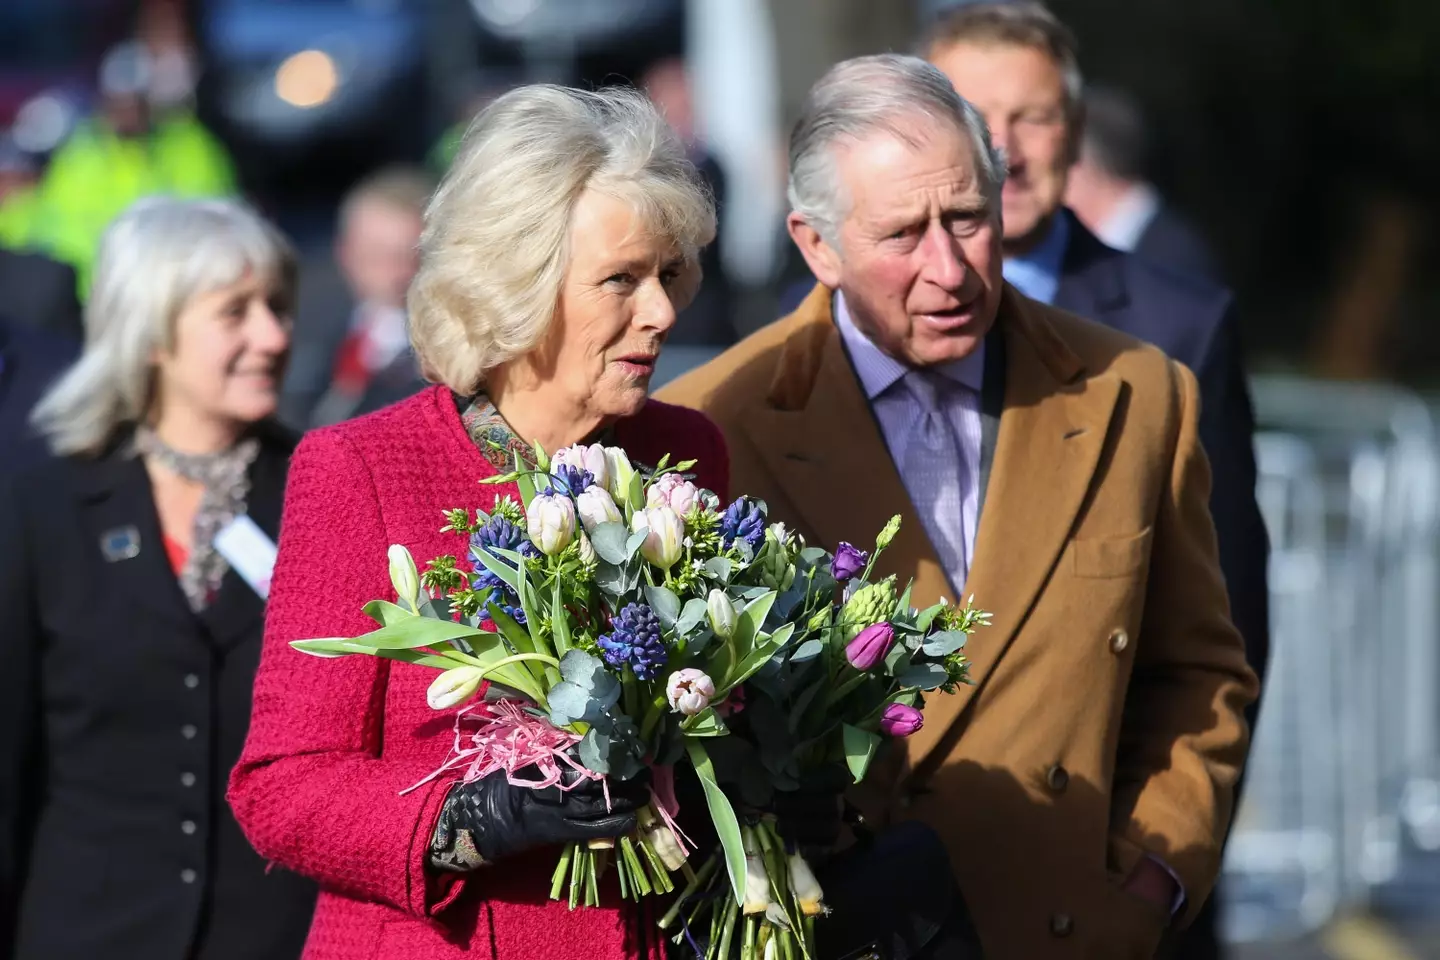 Prince Charles and Camilla got married in 2005 (